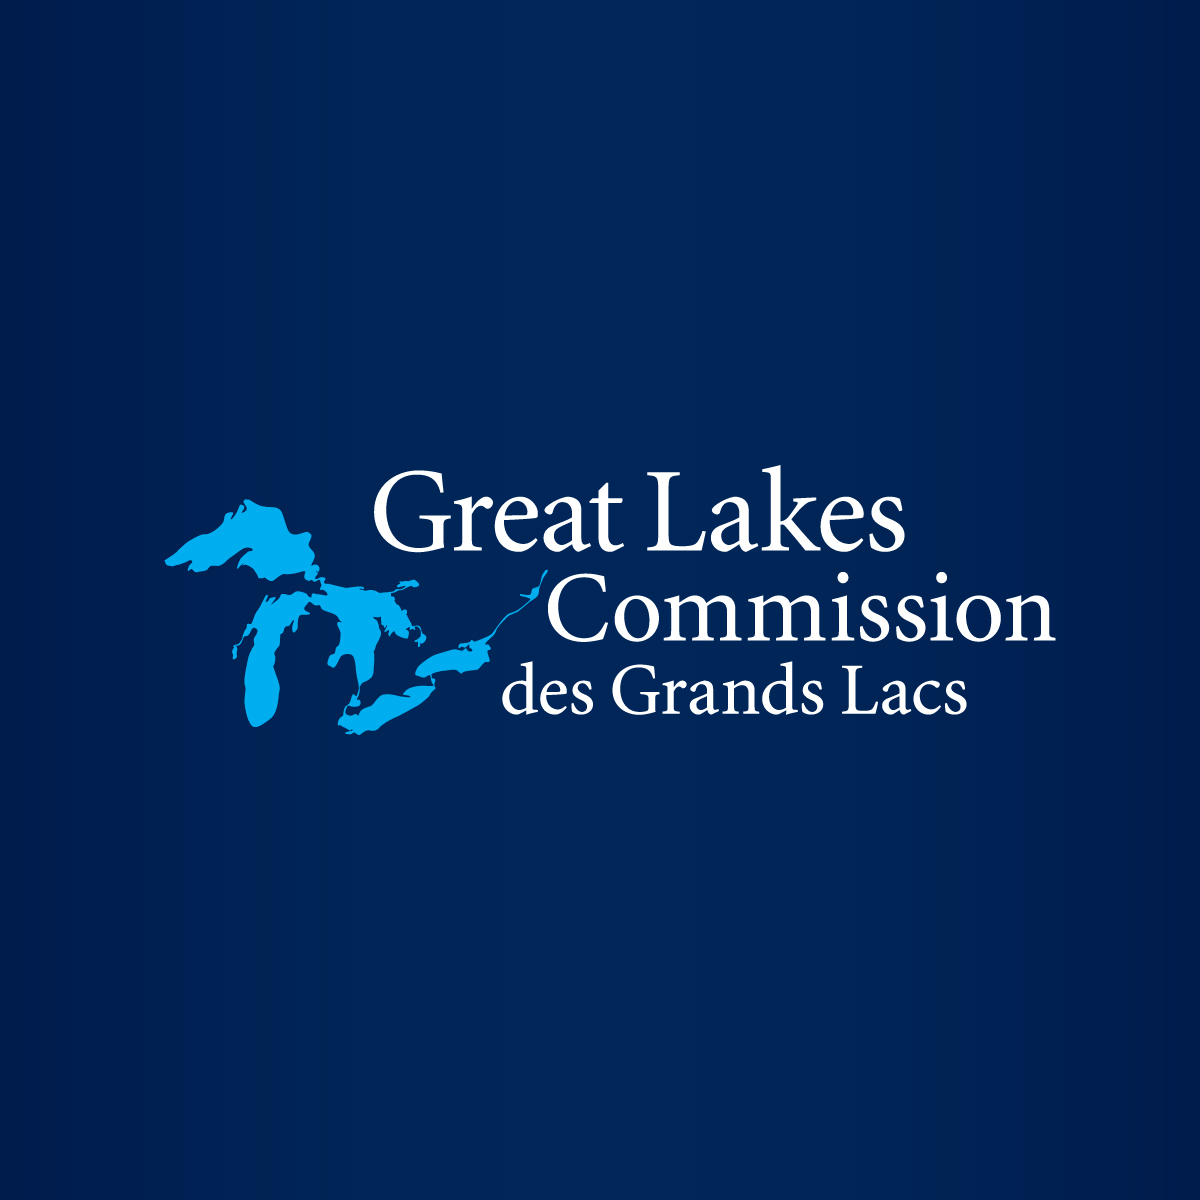 Agreement to protect Great Lakes celebrates 50th anniversary